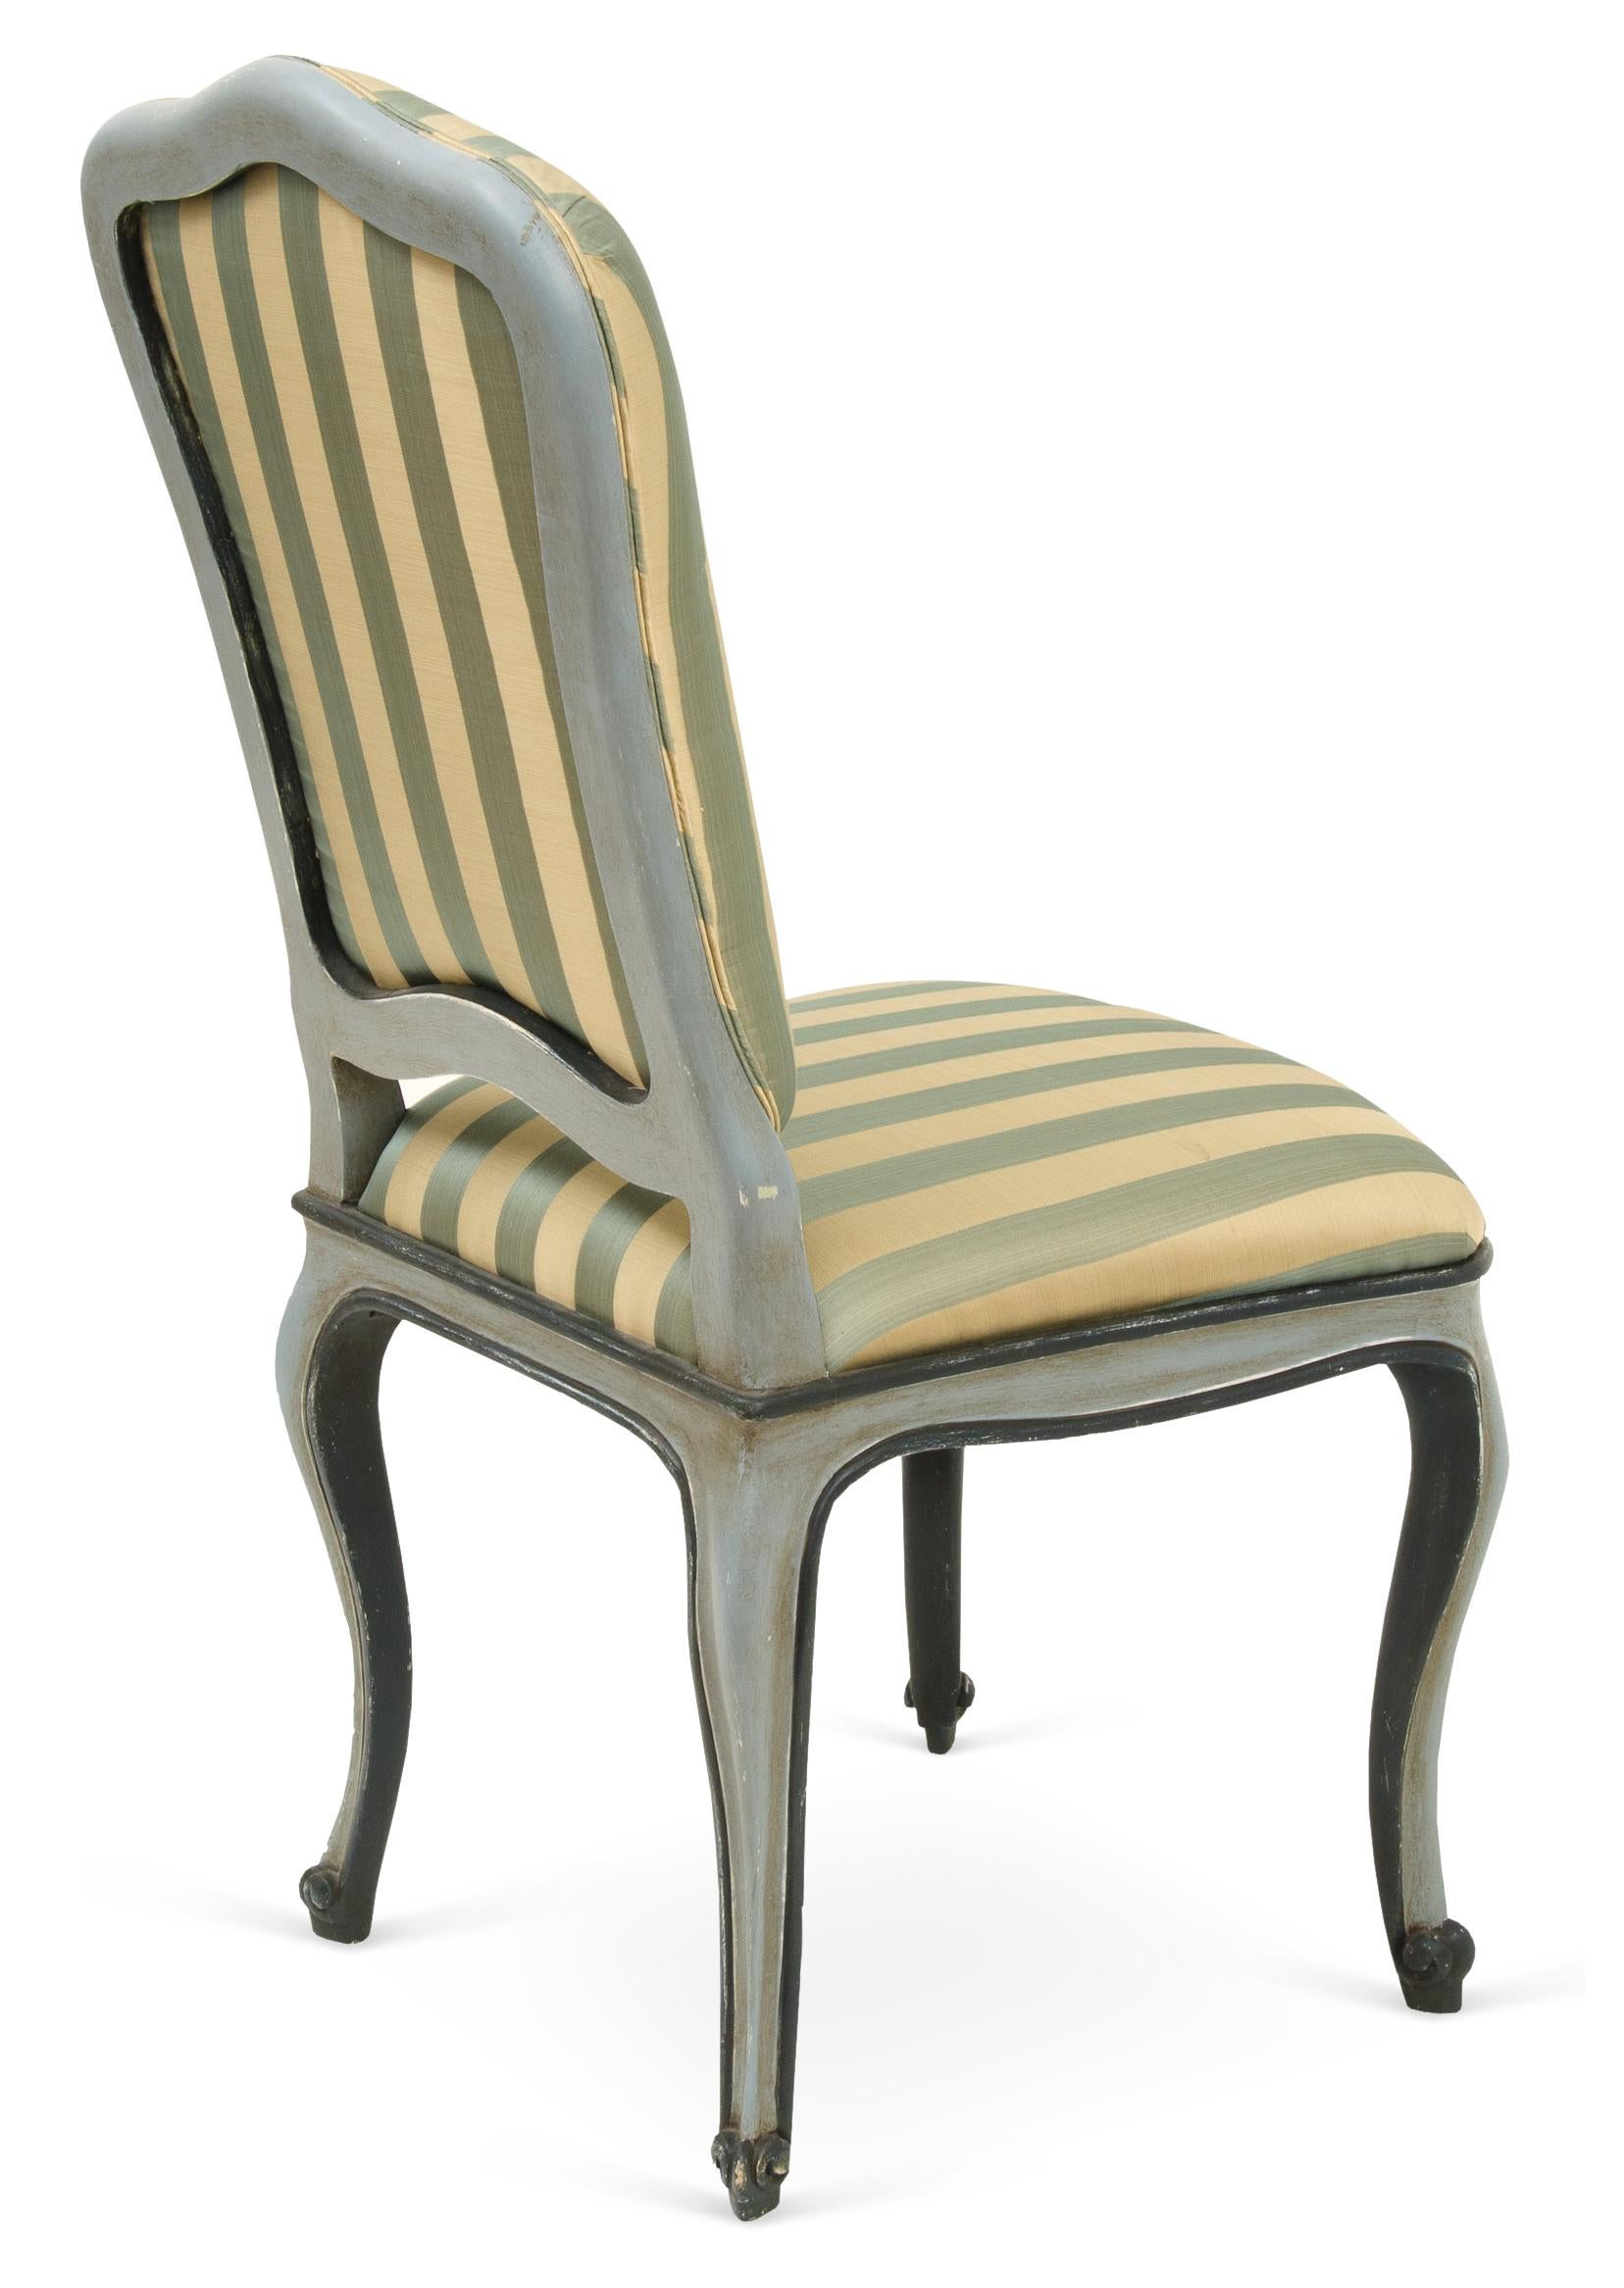 This reproduction of an antique Venetian chair is a hand-crafted model with traditional joinery, antique lacquer, and Borghese gilt on the hand-carved cabriole legs. Custom sizes and finishes available.
      